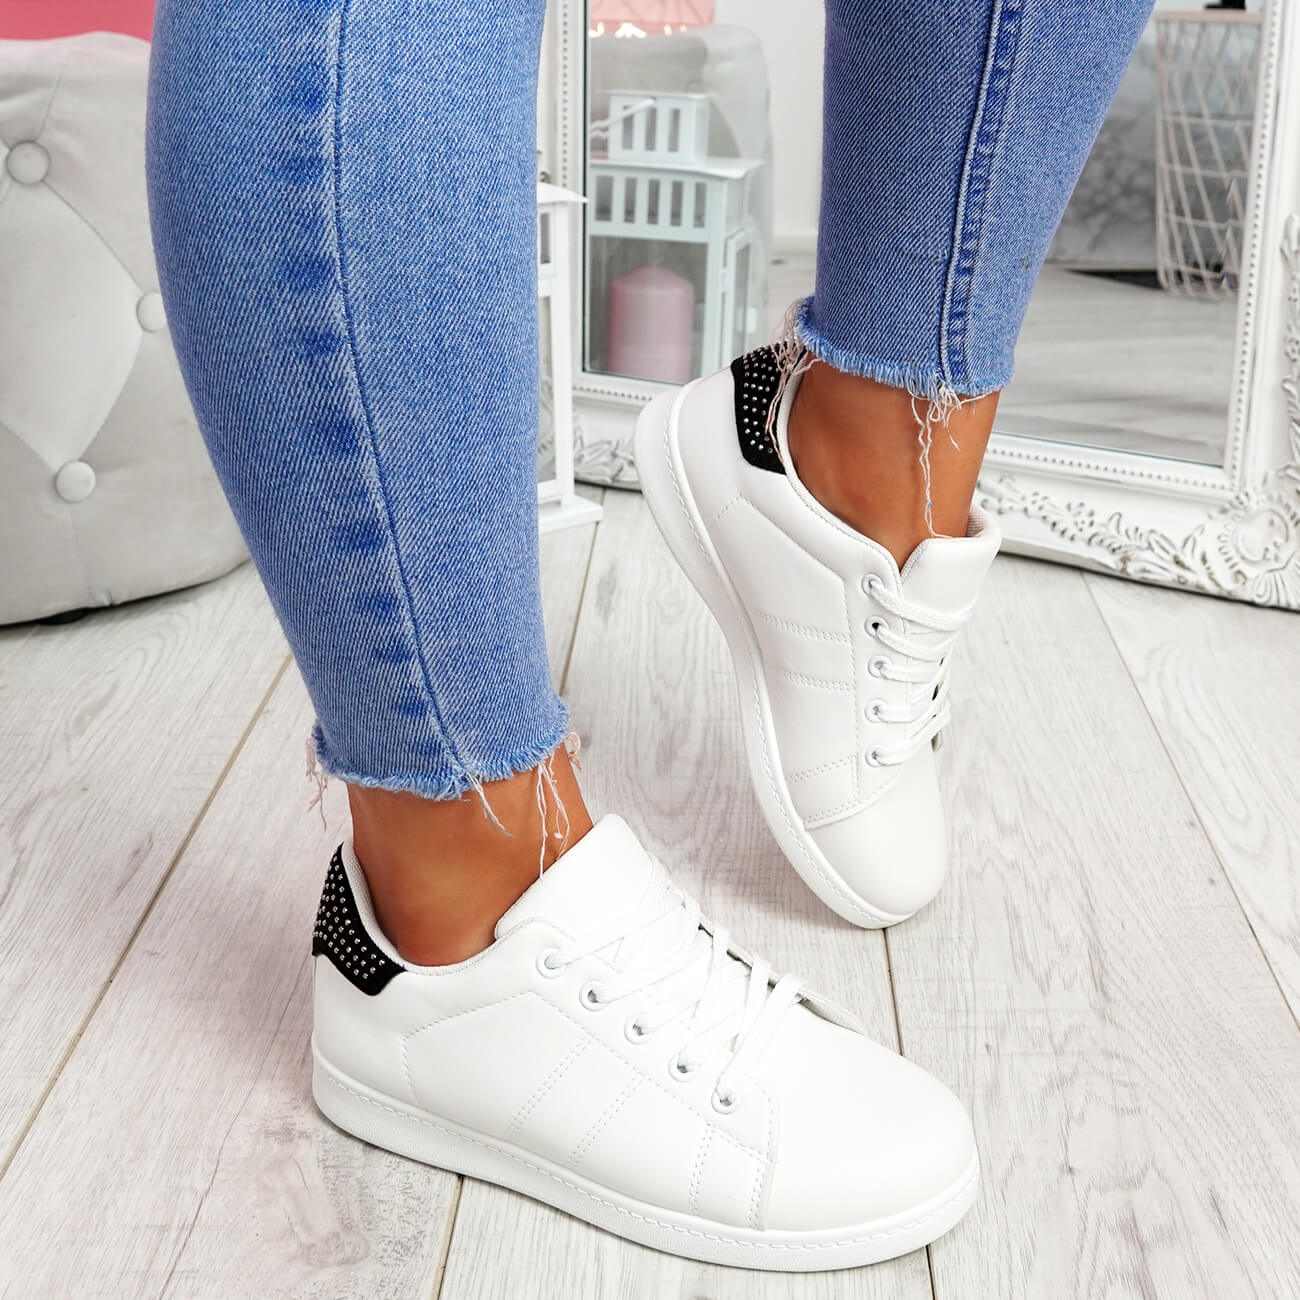 WOMENS LADIES LACE UP STUDDED PLIMSOLLS FLAT TRAINERS SNEAKERS PARTY ...